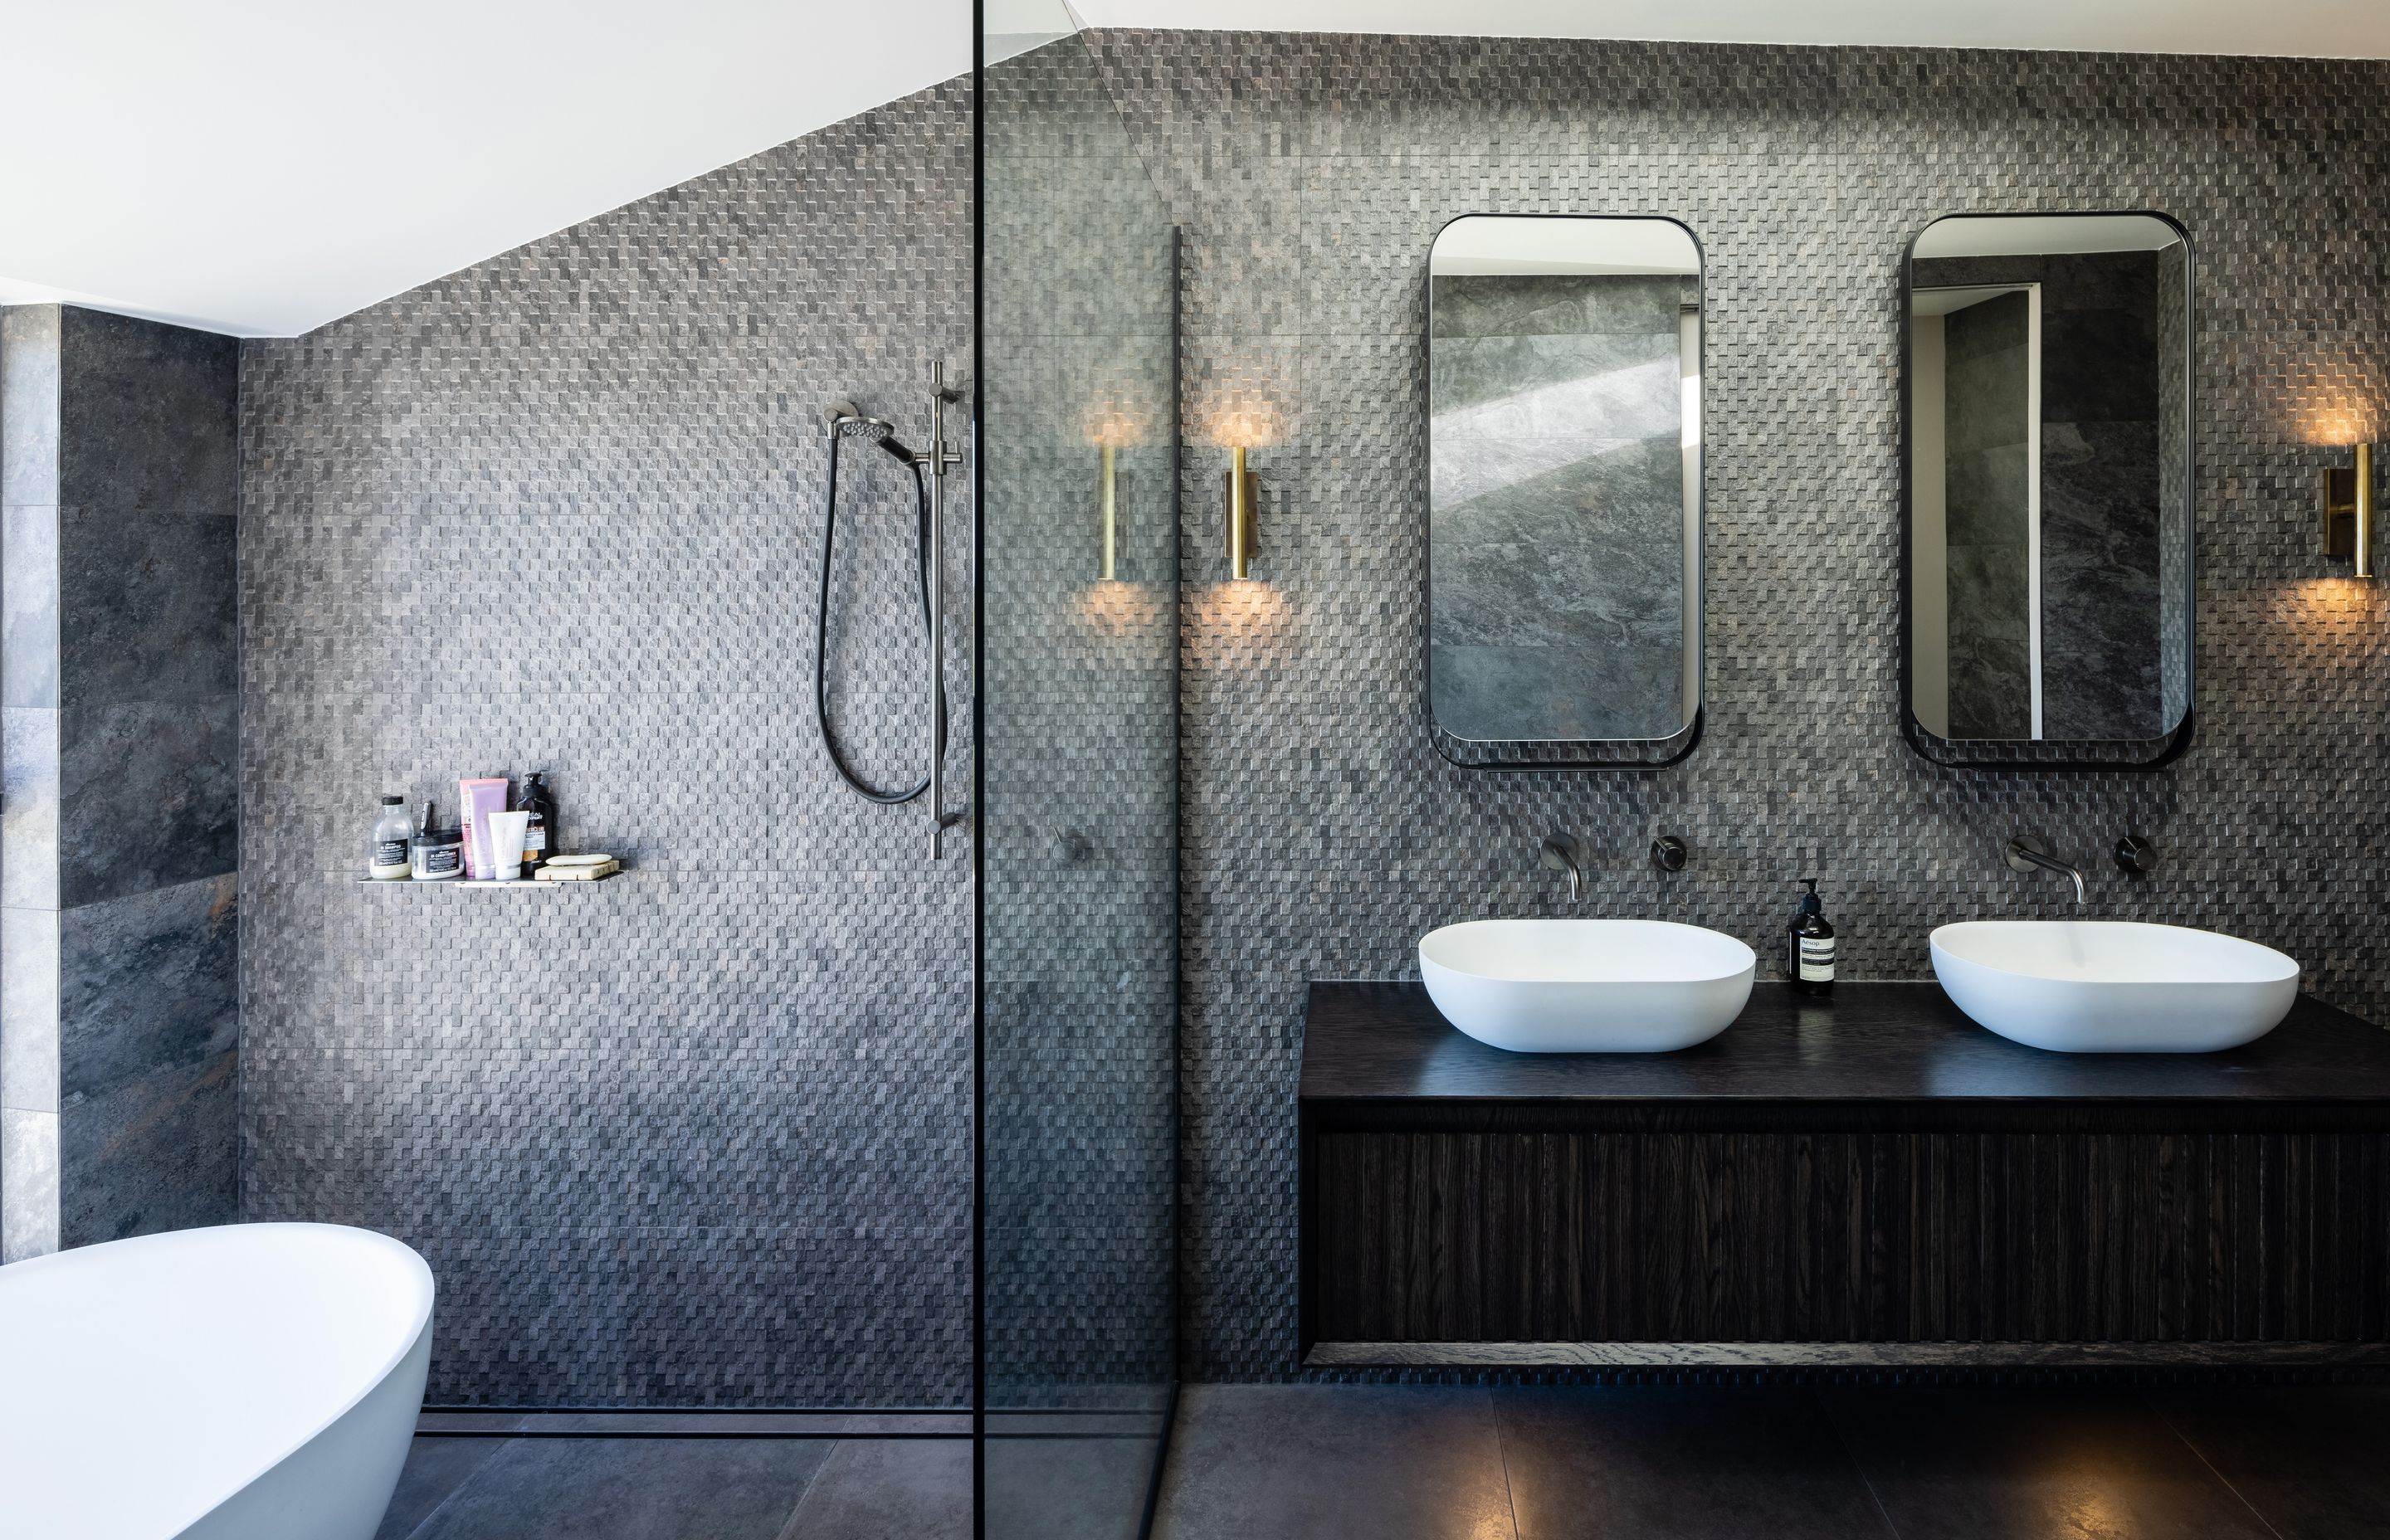 The floor-to-ceiling tiles of the master en suite create a clean but dramatic feeling.